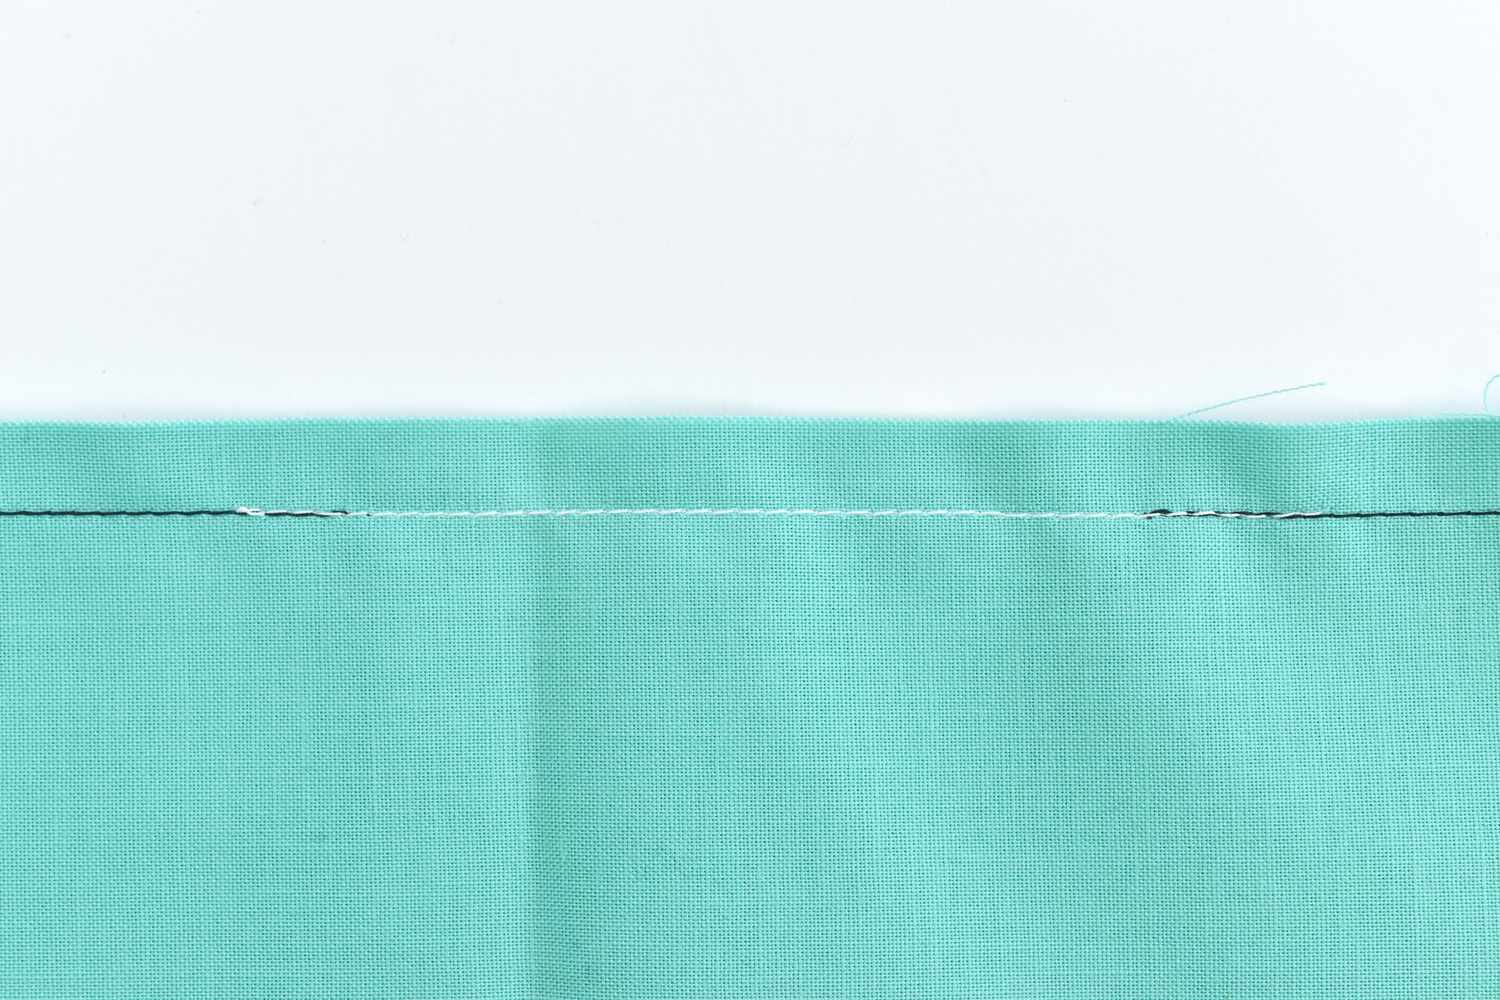 Sew the New Seam, Overlapping the Old